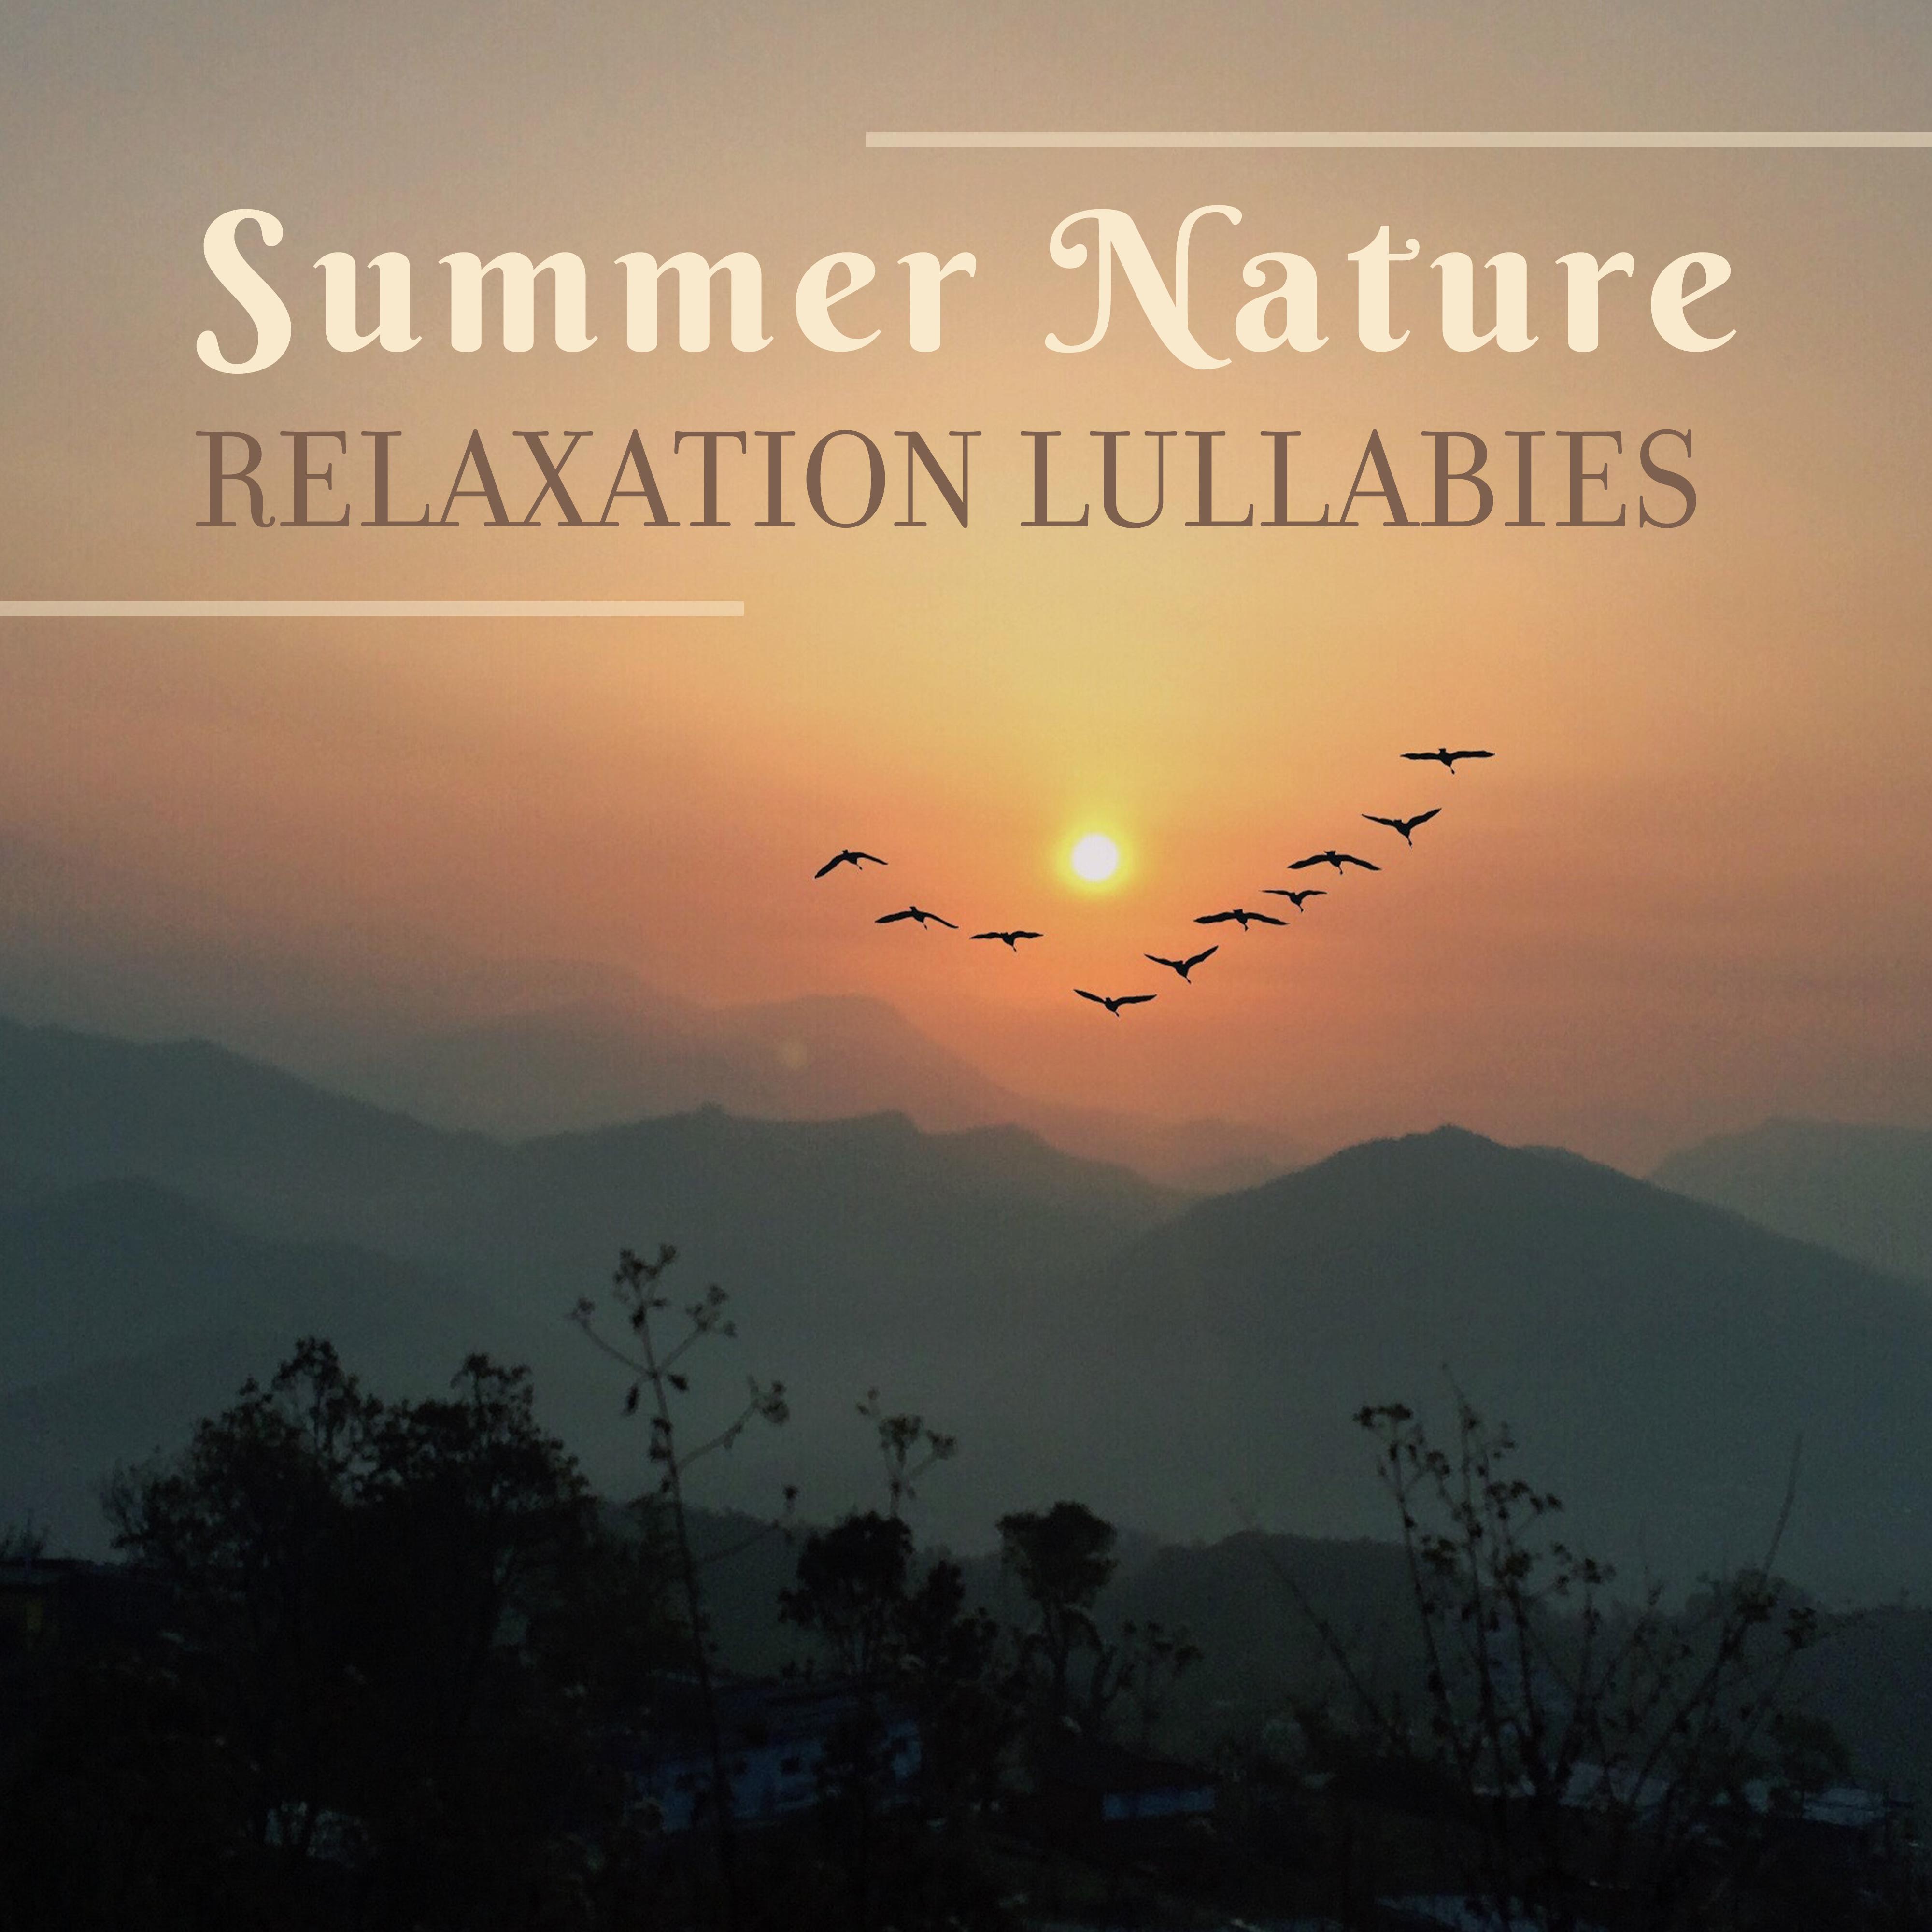 Summer Nature Relaxation Lullabies: 2019 New Age Music with Beautifull Piano Melodies & Sounds of Summer Birds Singing, Forest, Meadow, Water & Other, Total Relaxation & Calming Down, Stress Relief